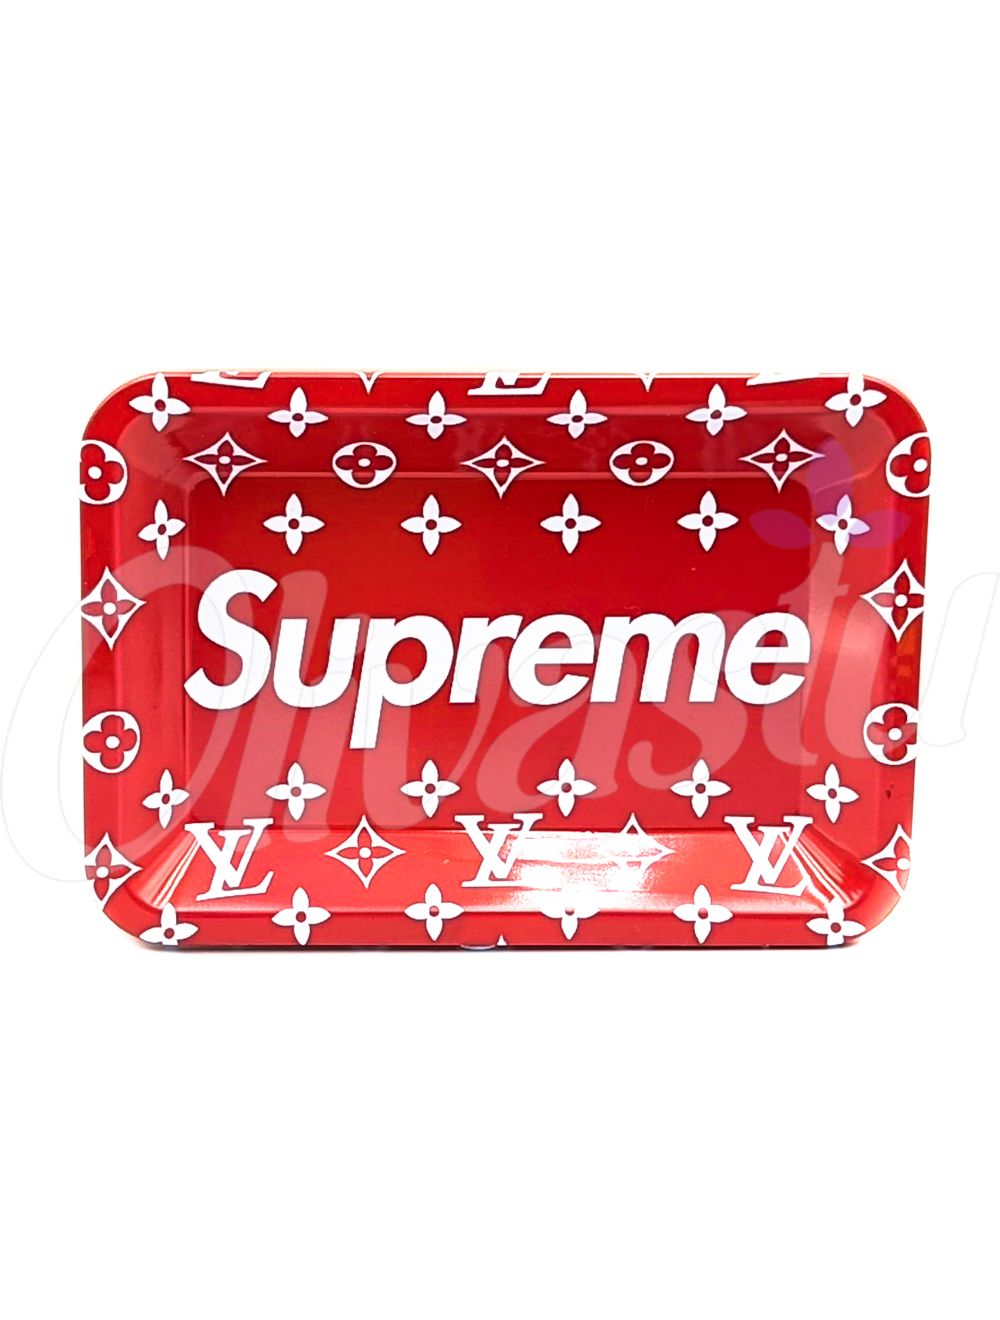 Supreme Metal Rolling Tray Small - Smoking Accessories